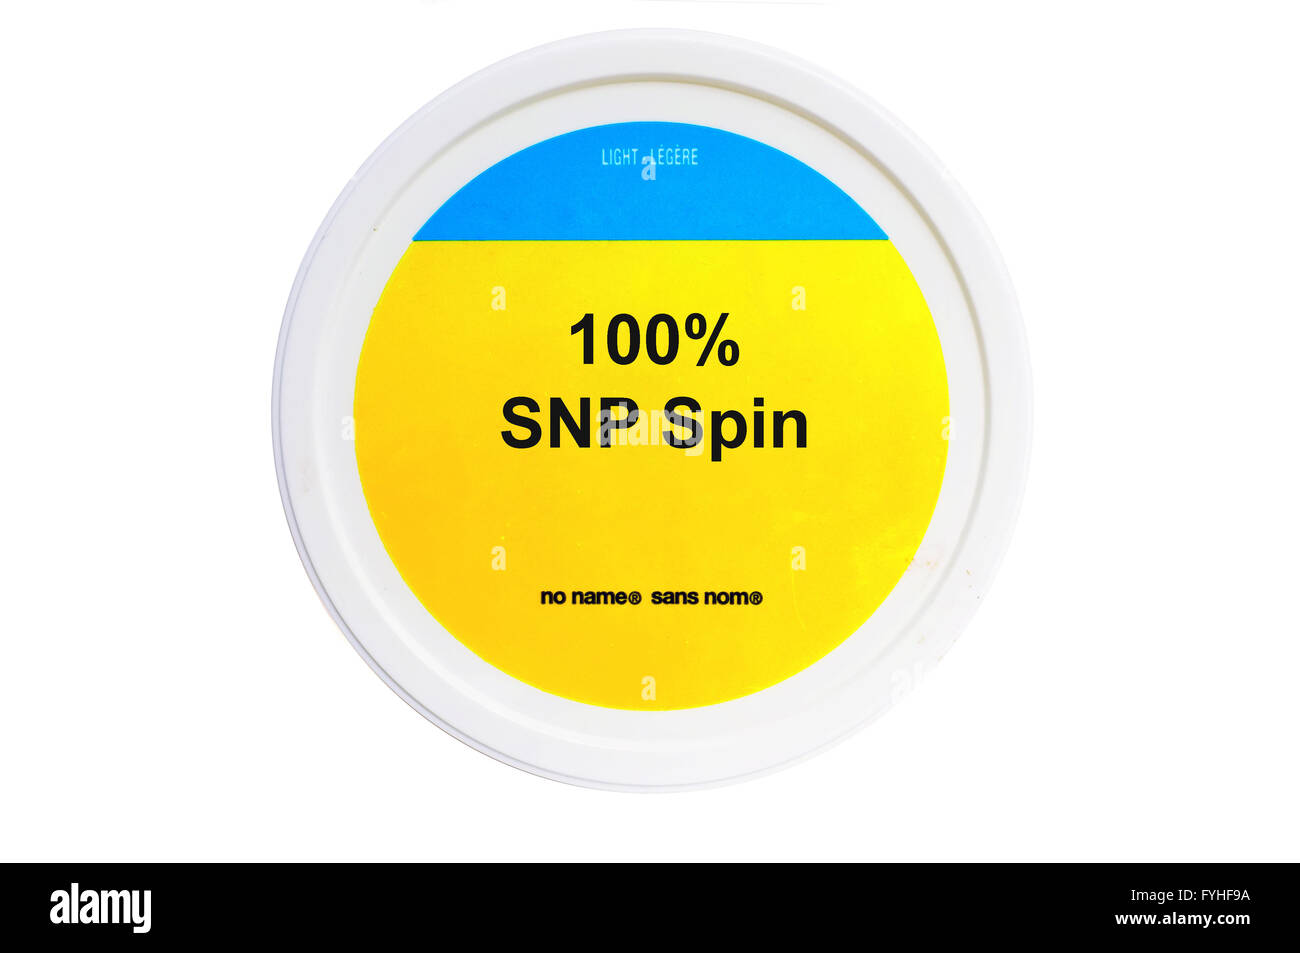 A tub with 100% SNP Spin written on the label photographed against a white background. Stock Photo